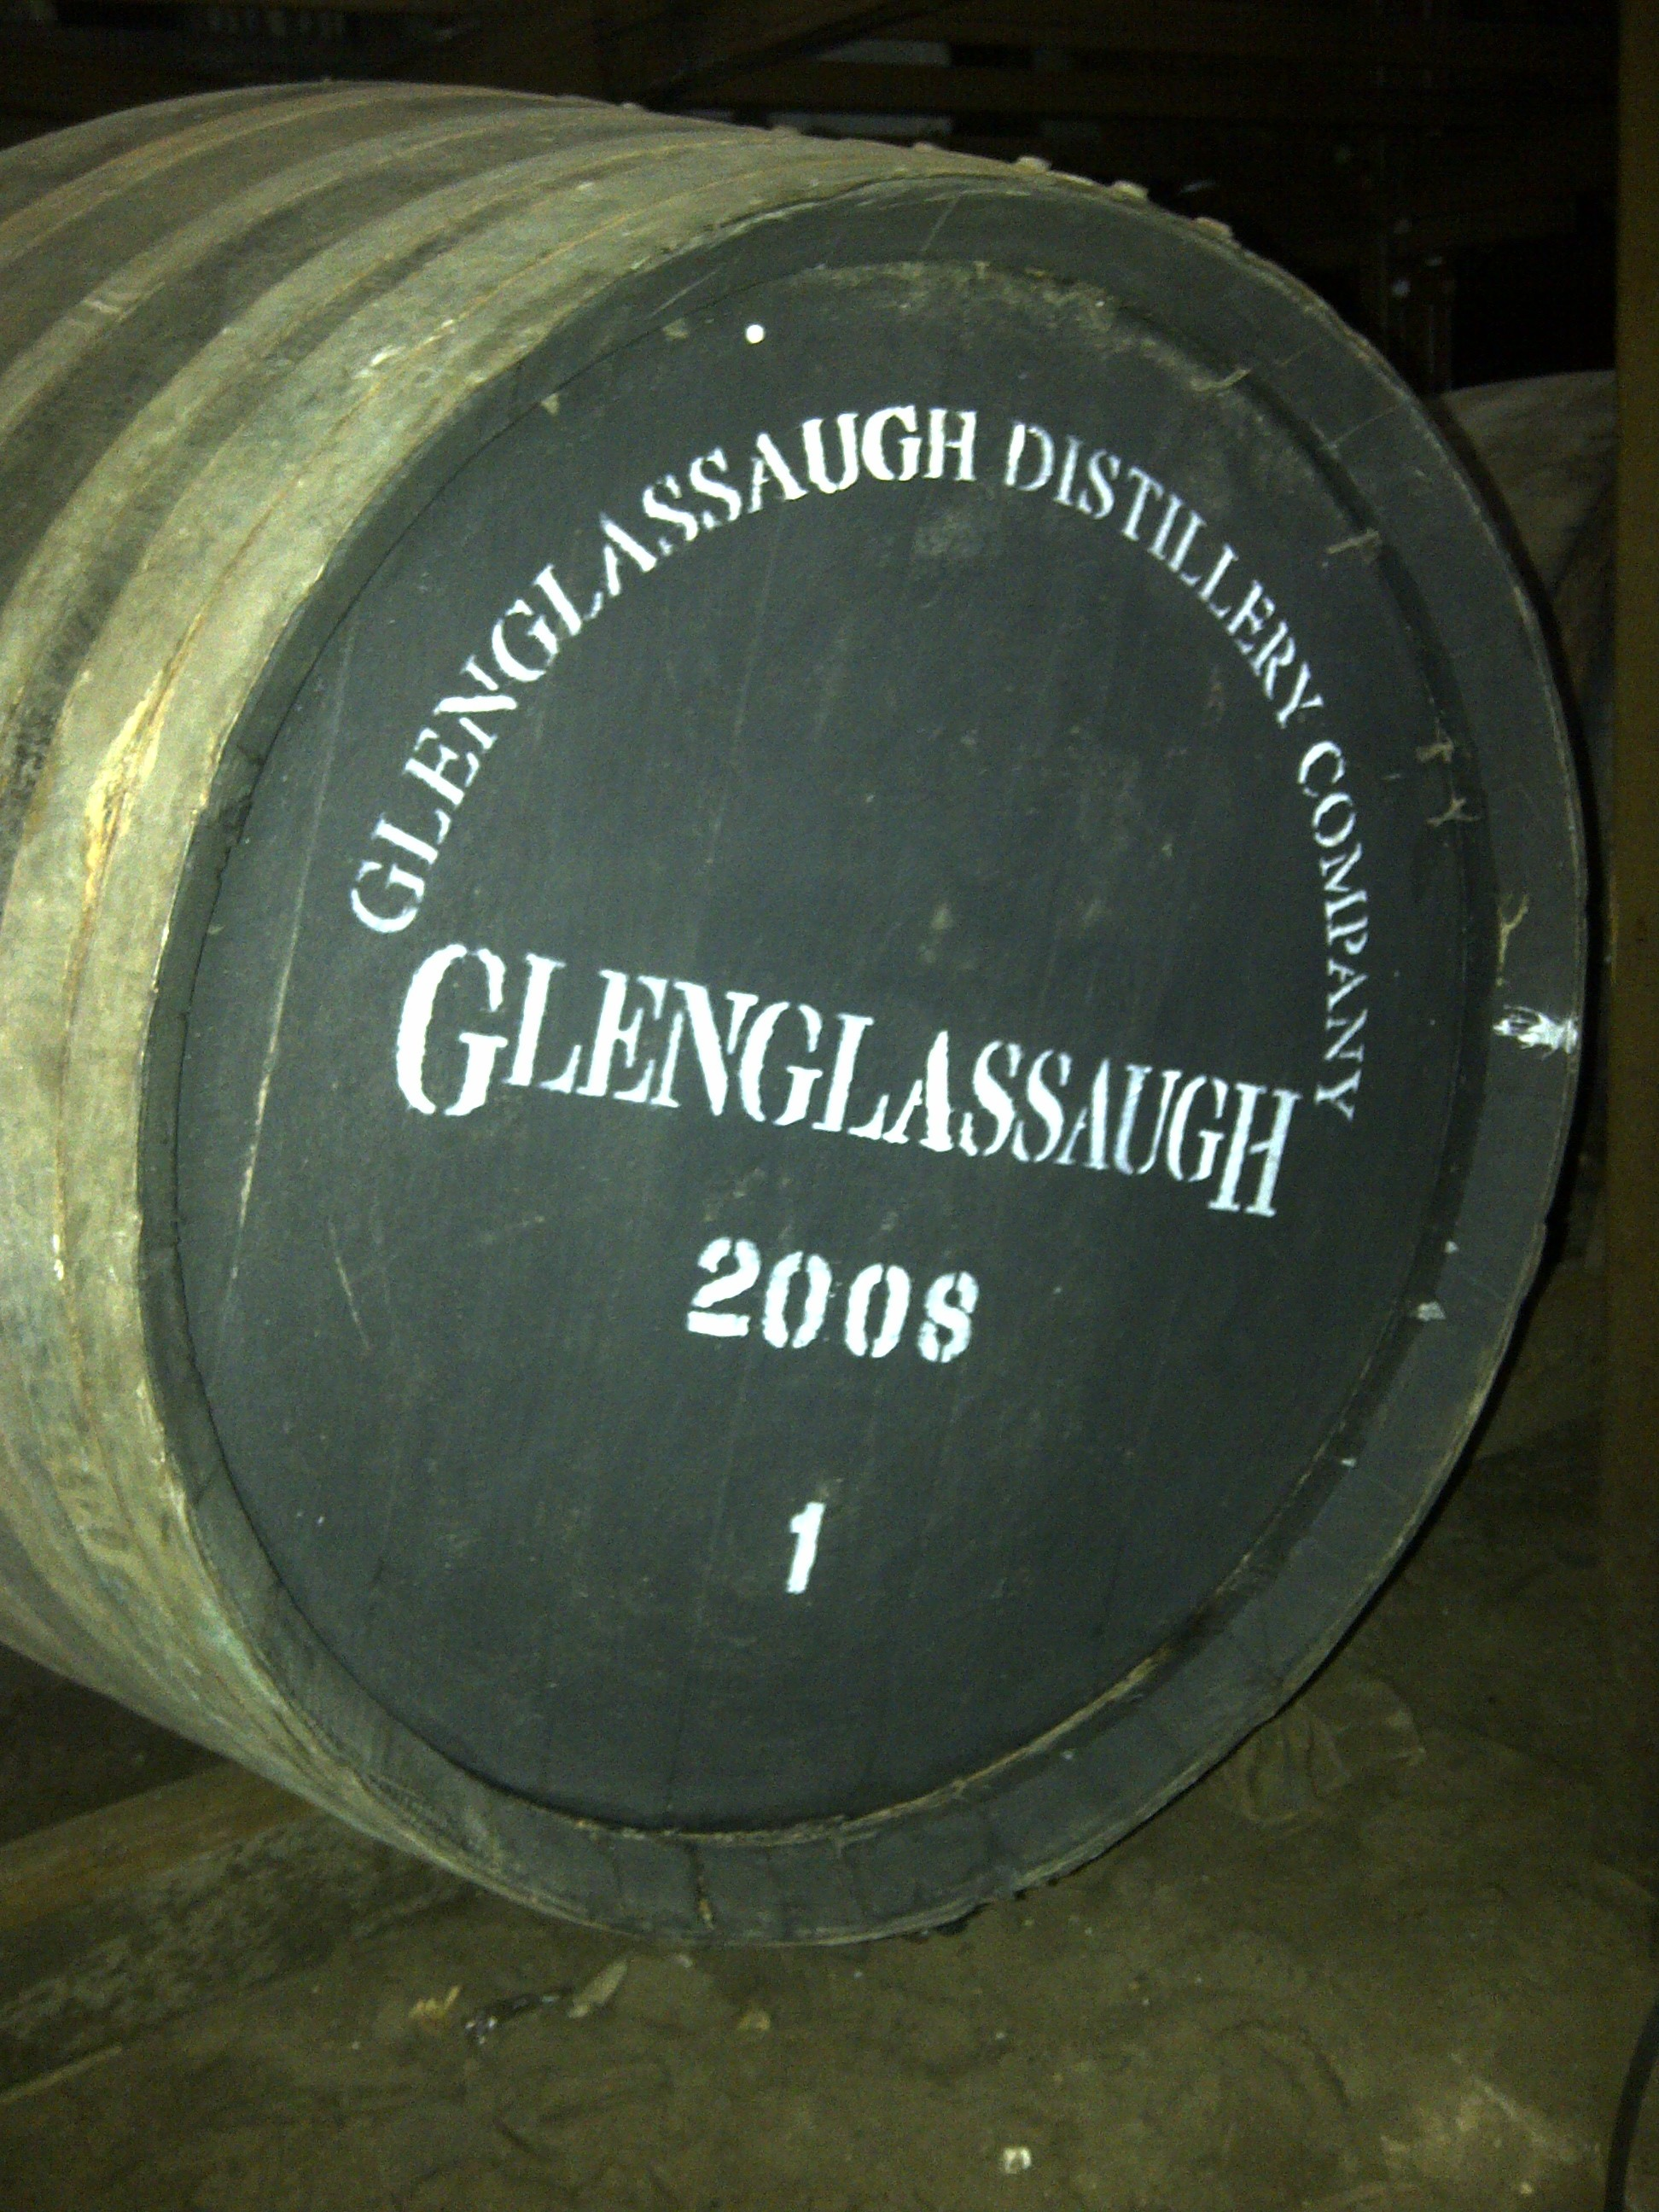 The first cask from the revived Glenglassaugh Distillery.